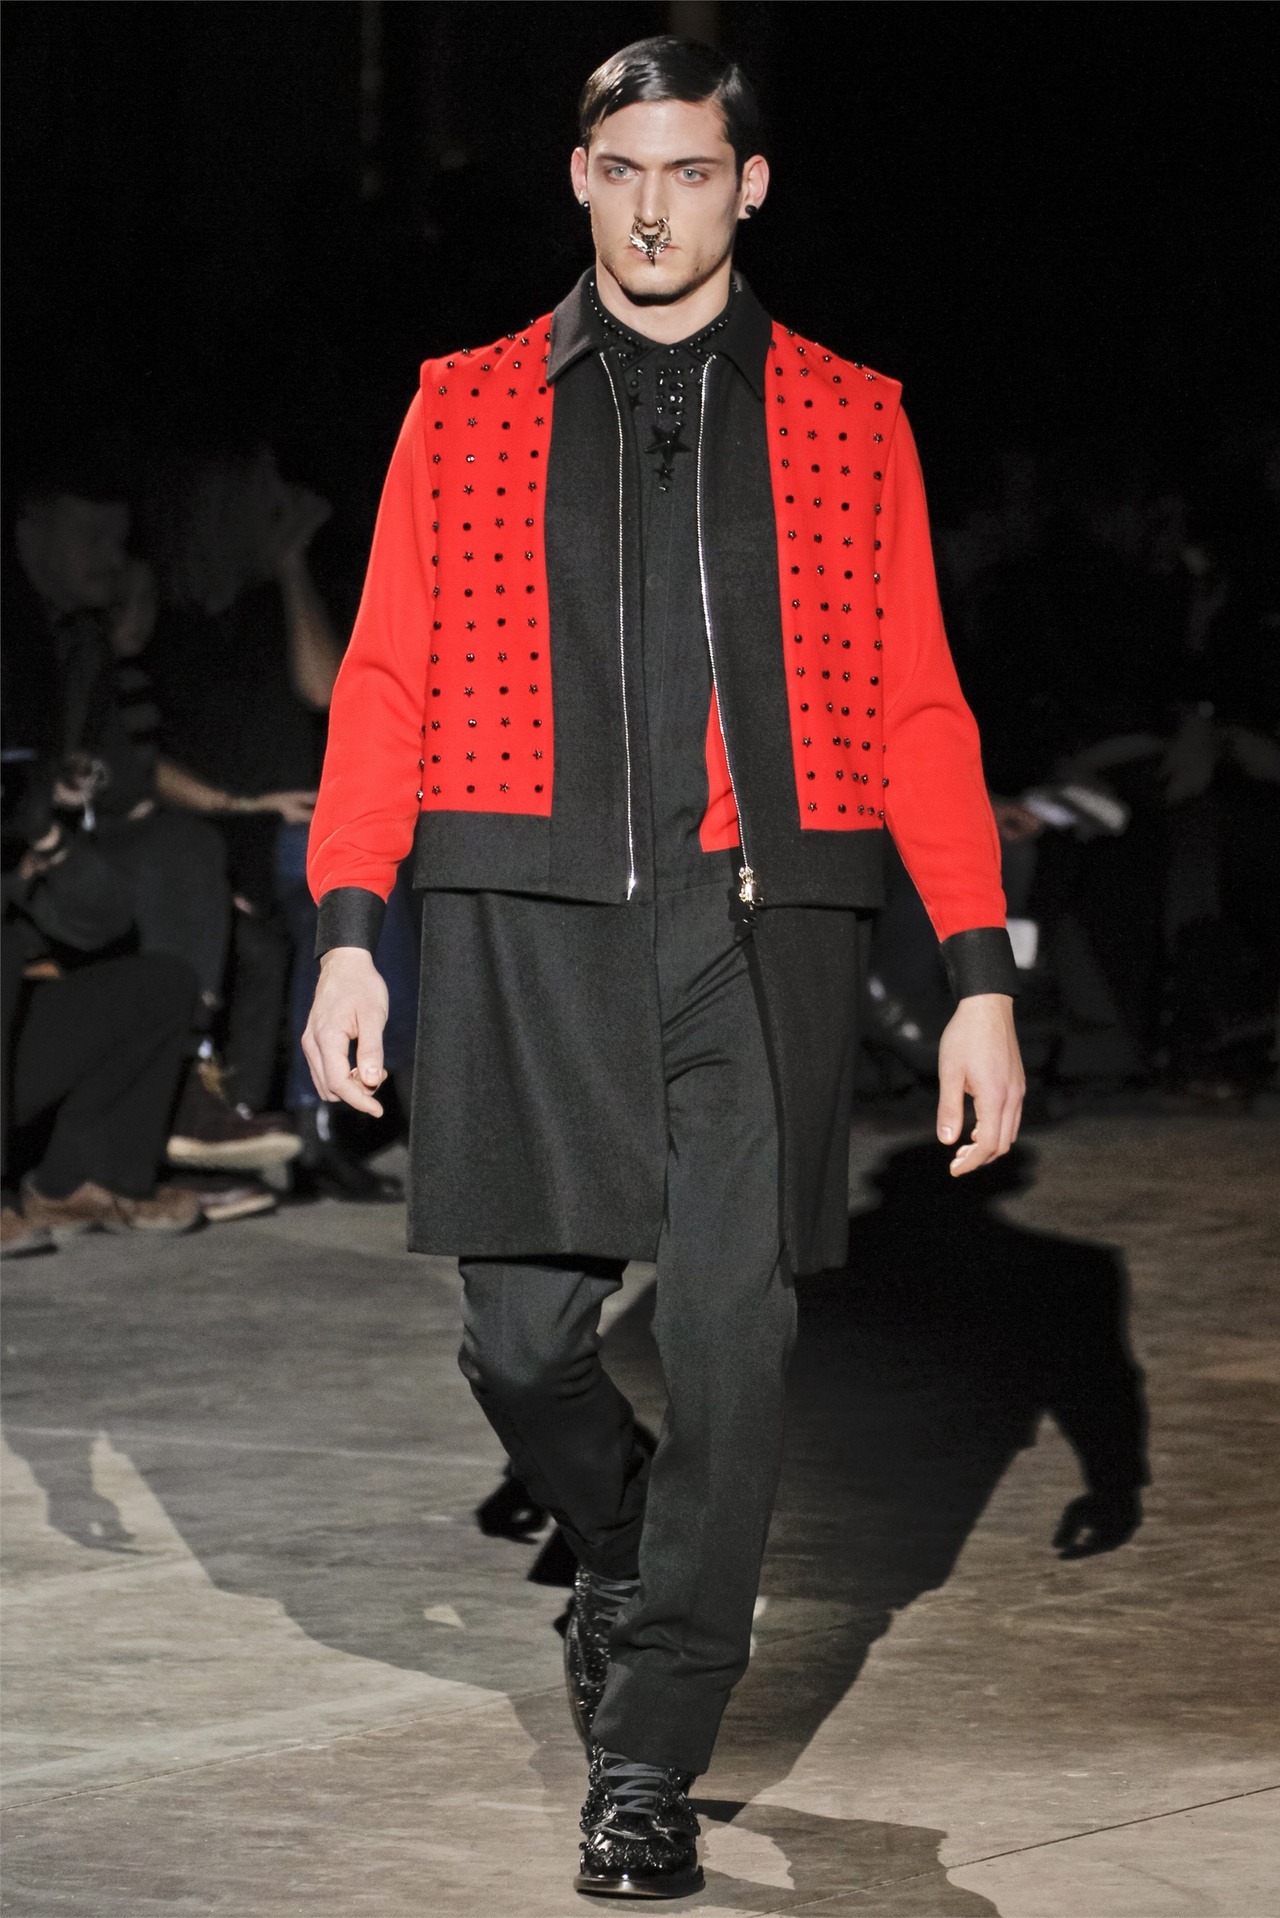 Givenchy for Ramsey Bolton - A Game of Clothes